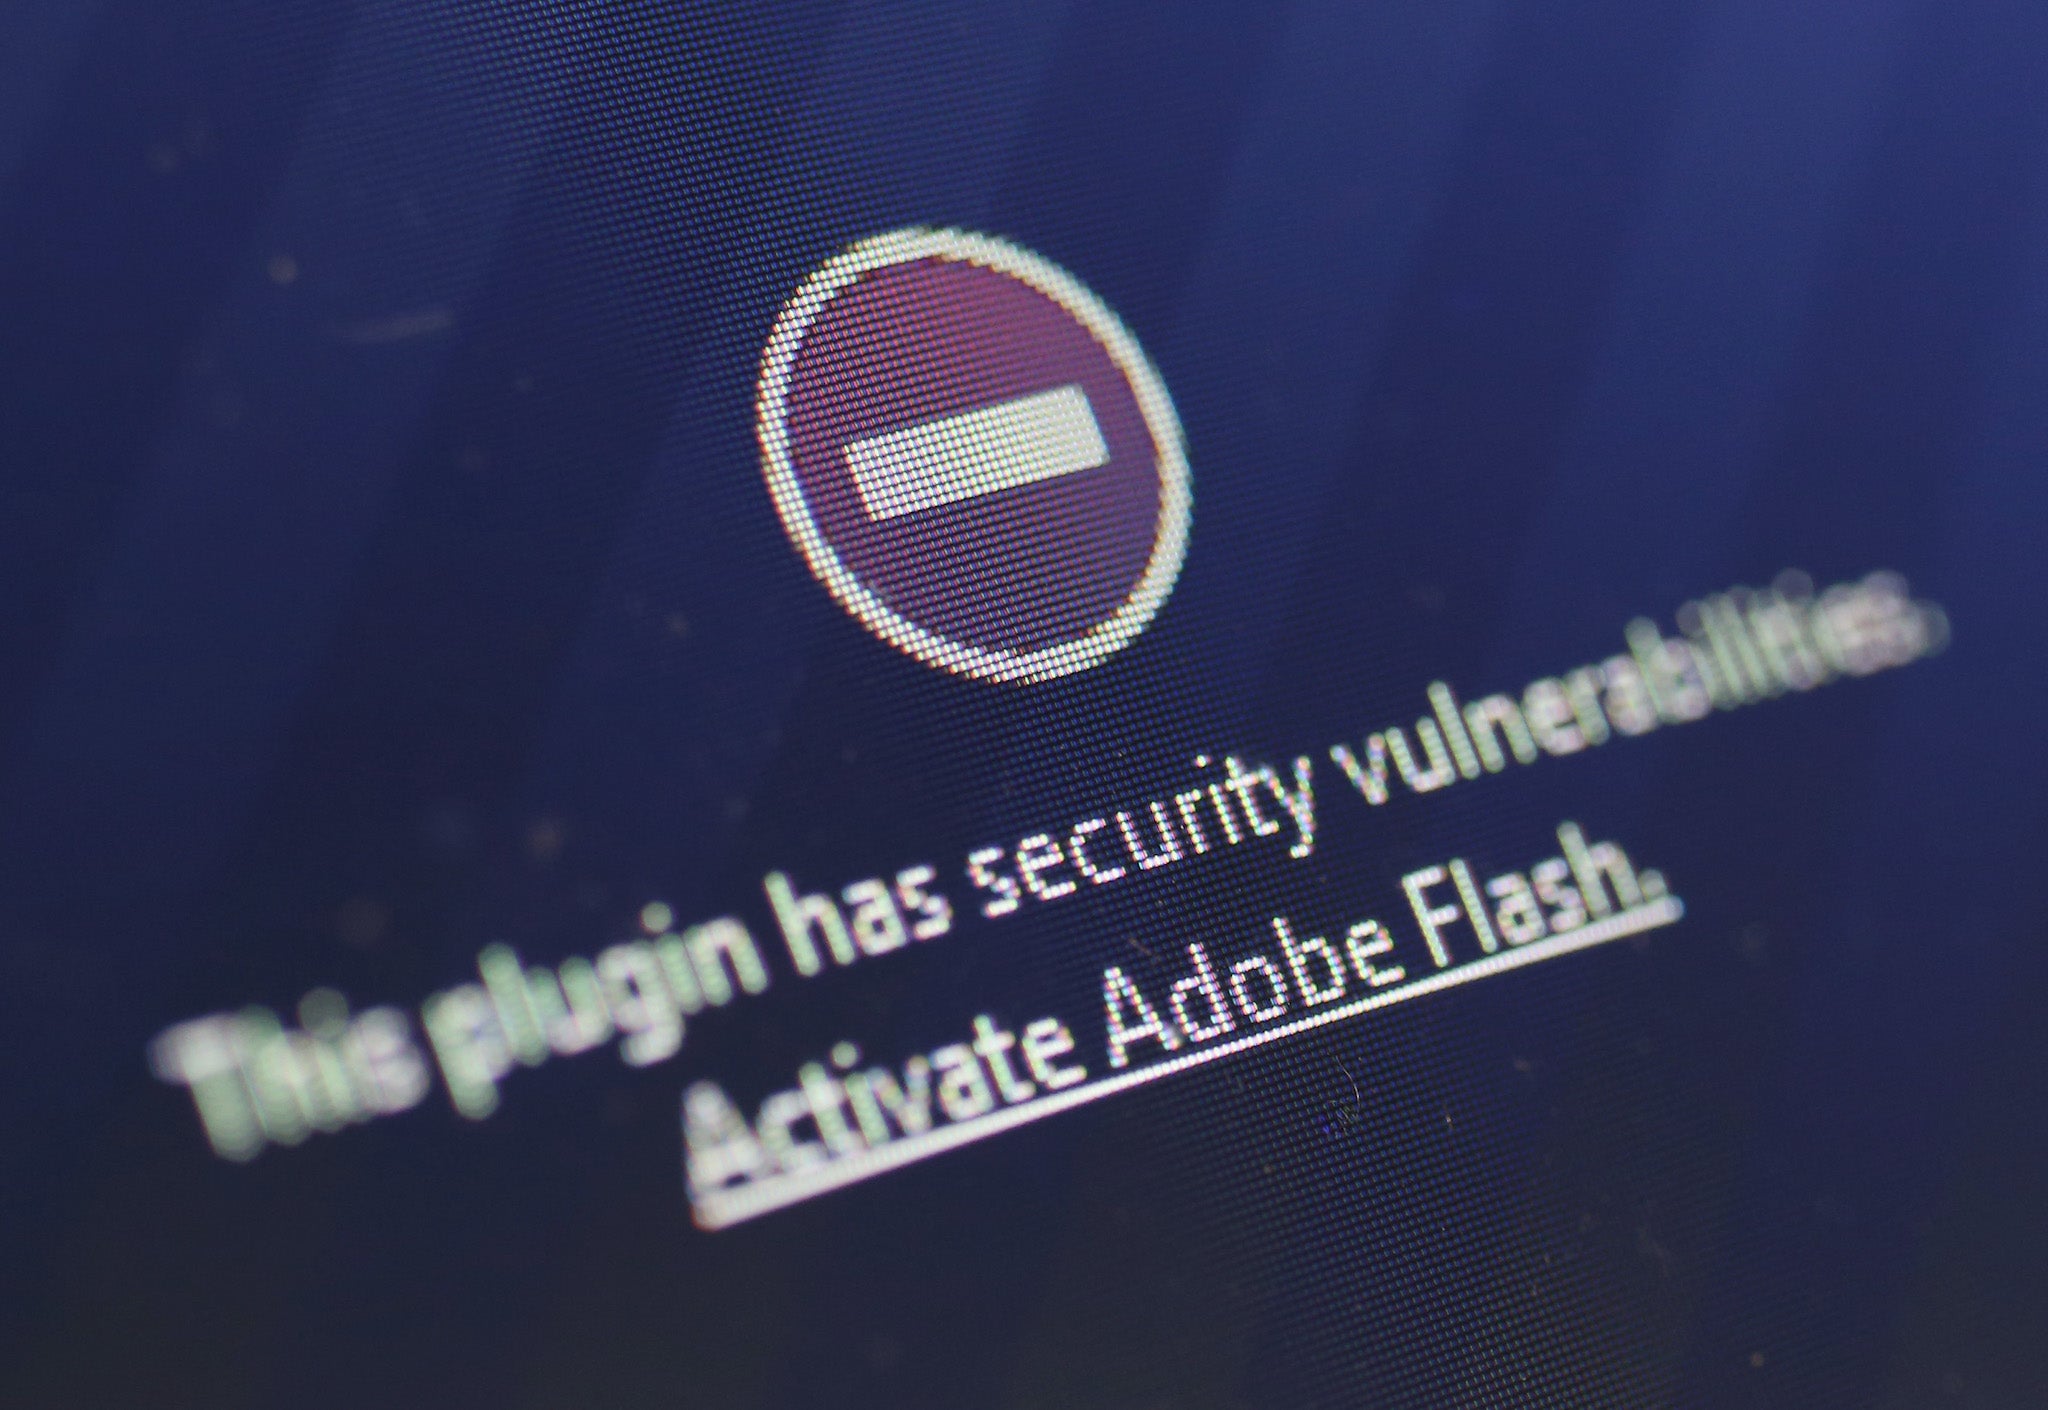 A window on the Mozilla Firefox browser shows the browser has blocked the Adobe Flash plugin from activating due to a security issue on July 14, 2015 in Berlin, Germany